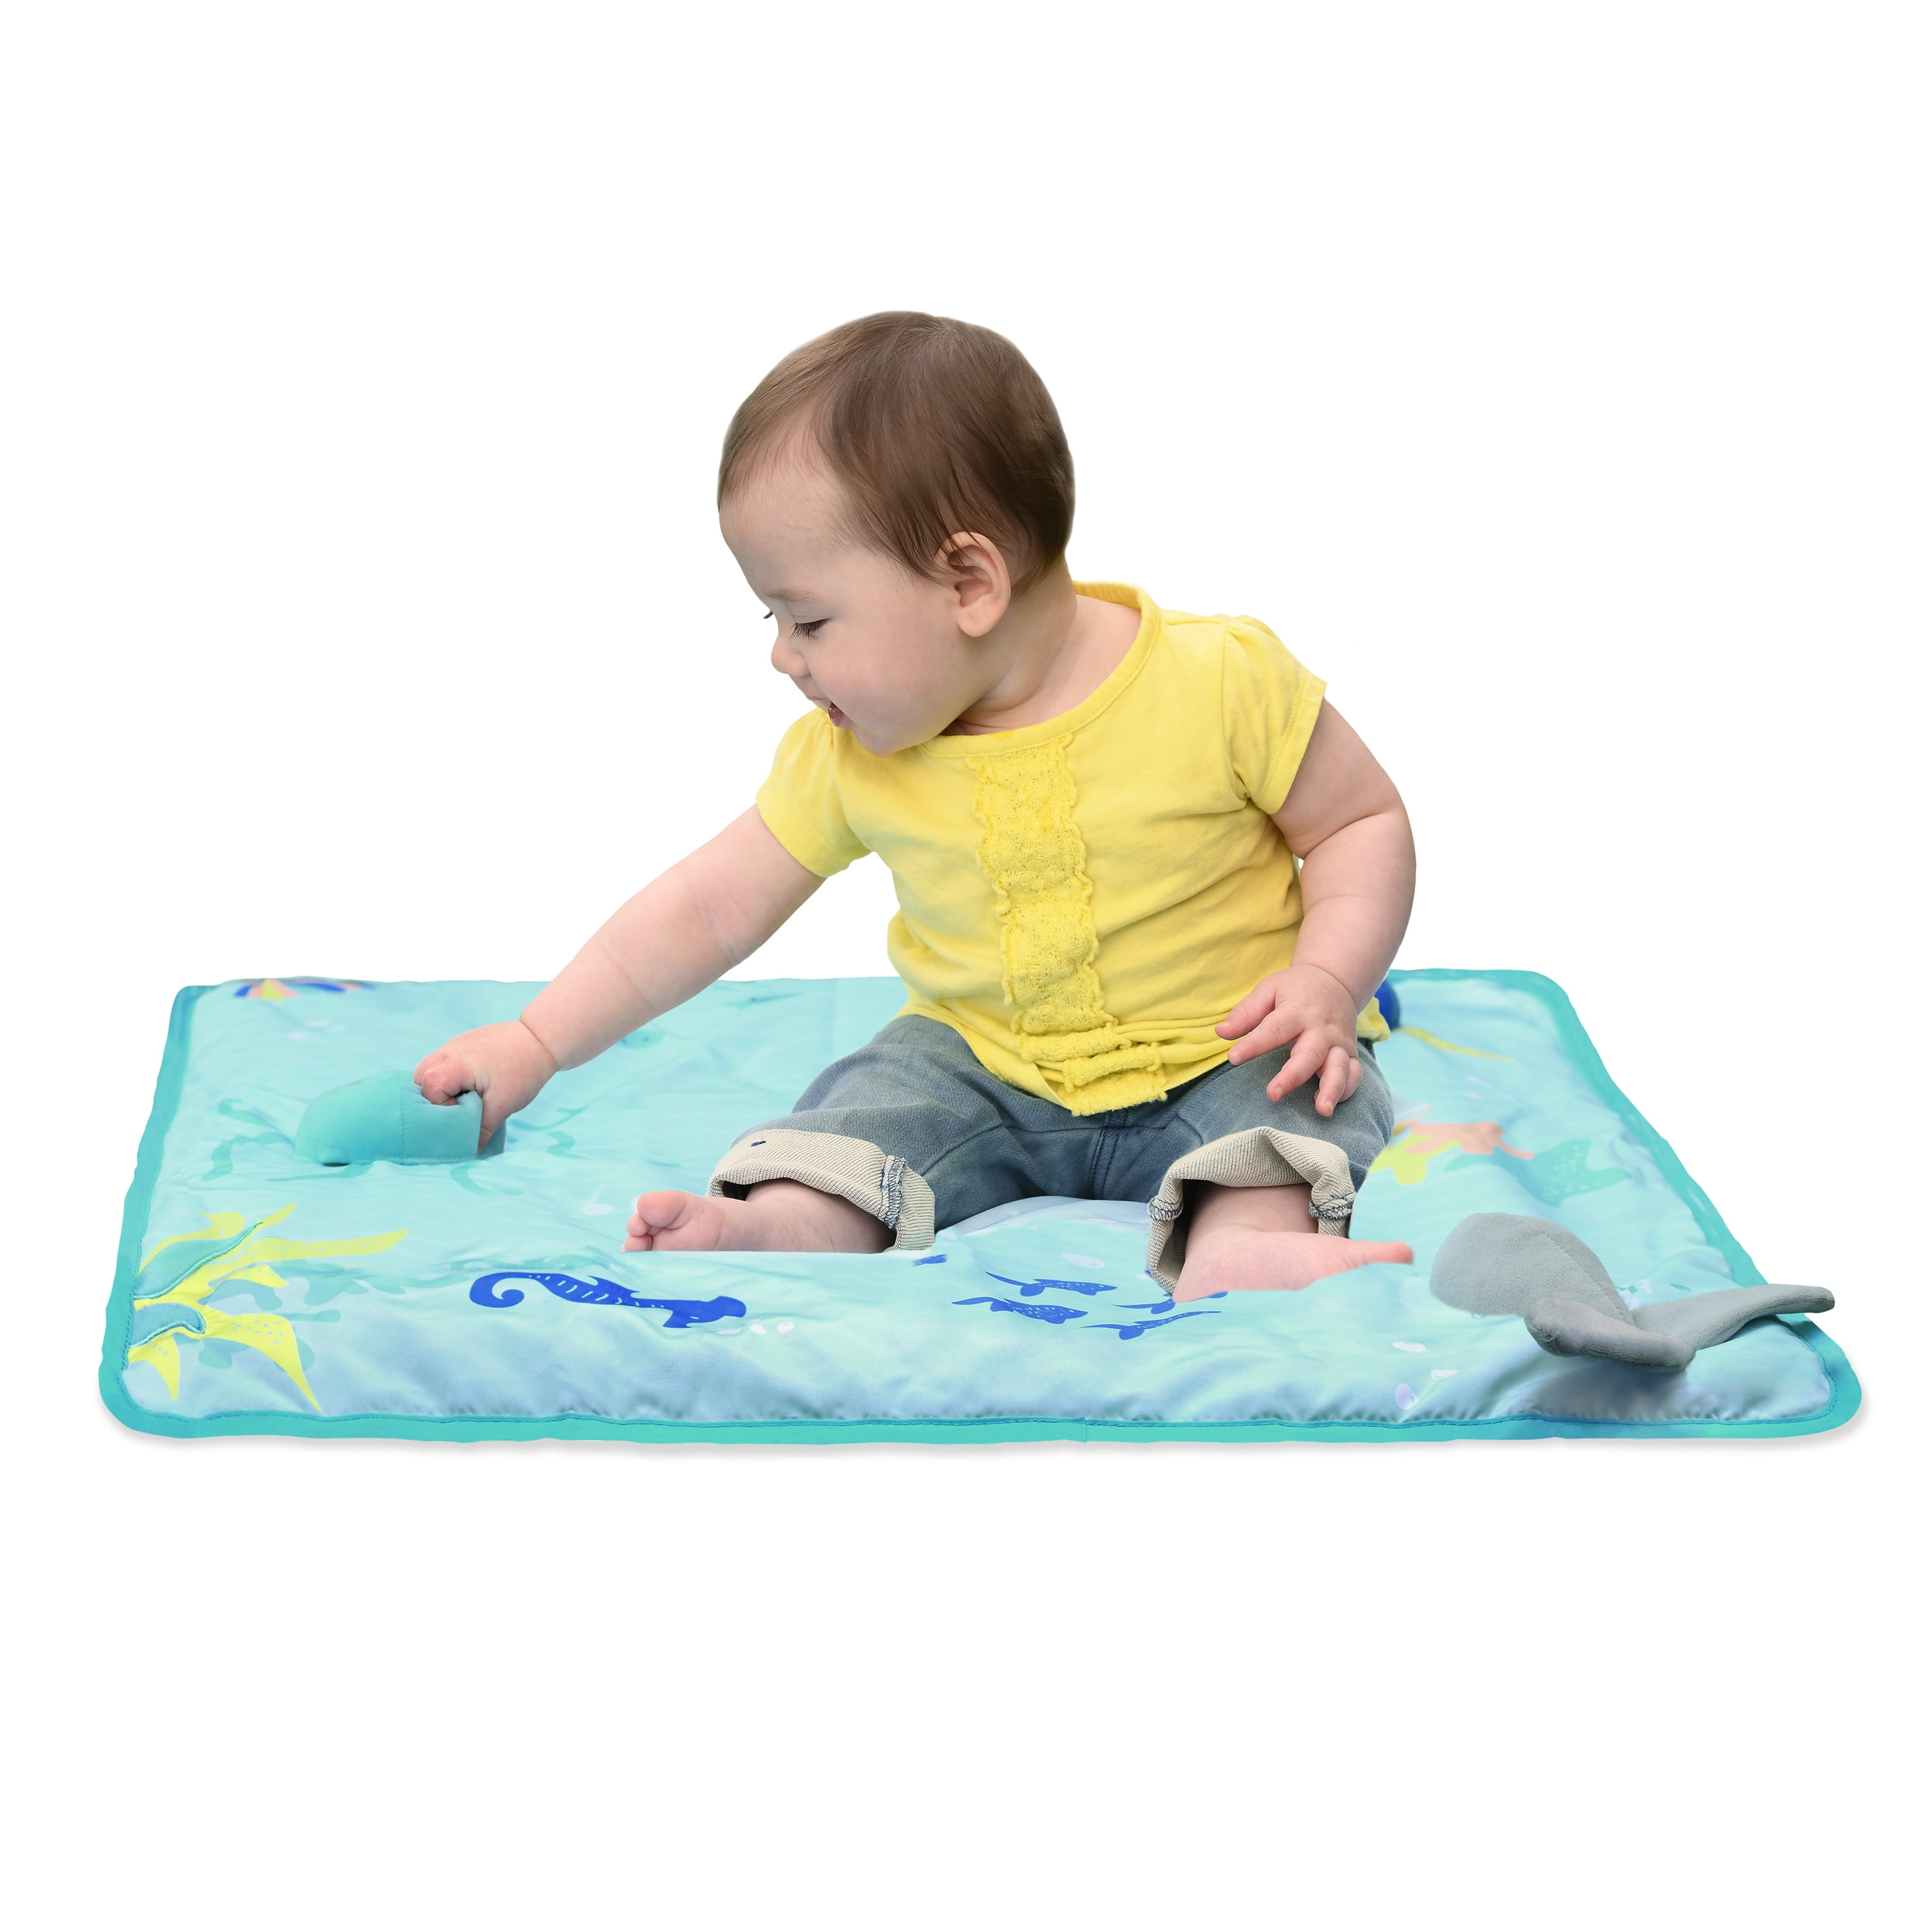 Ocean Sea-life style Baby Play mat Musical Activity Gym Play Gym 